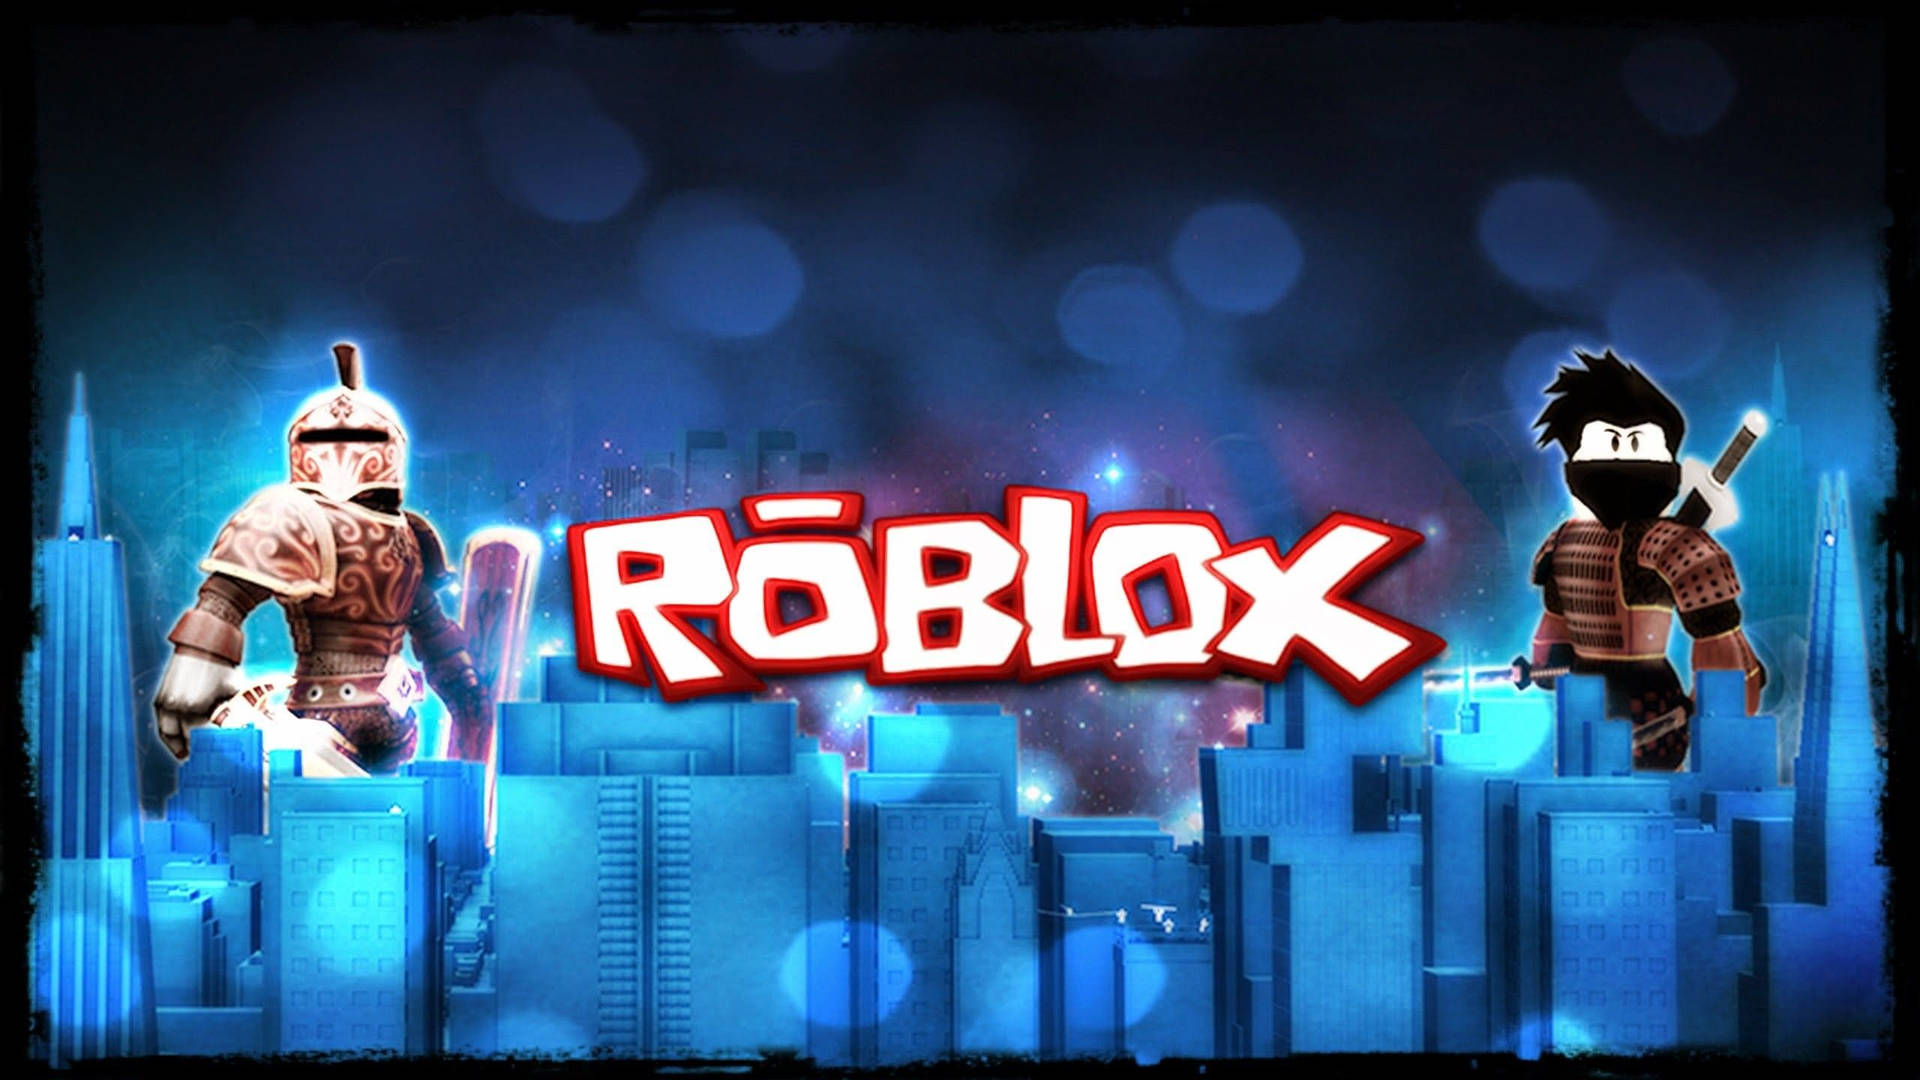 Look At The Adorable Roblox Character! Background